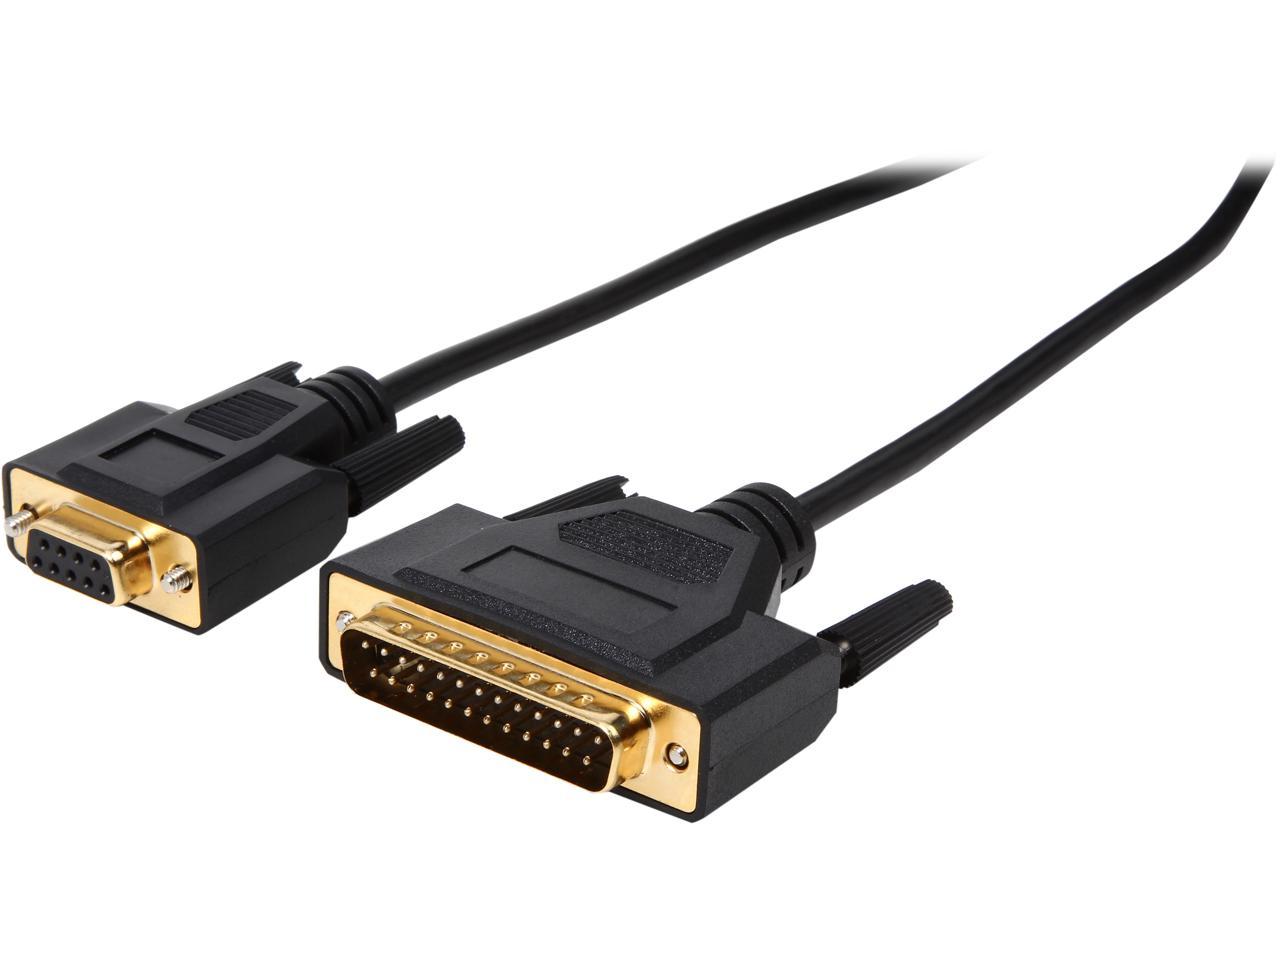 P450-006 GOLD Brand New Tripp Lite Null Modem Serial RS232 Cable DB9 F/F 6-ft